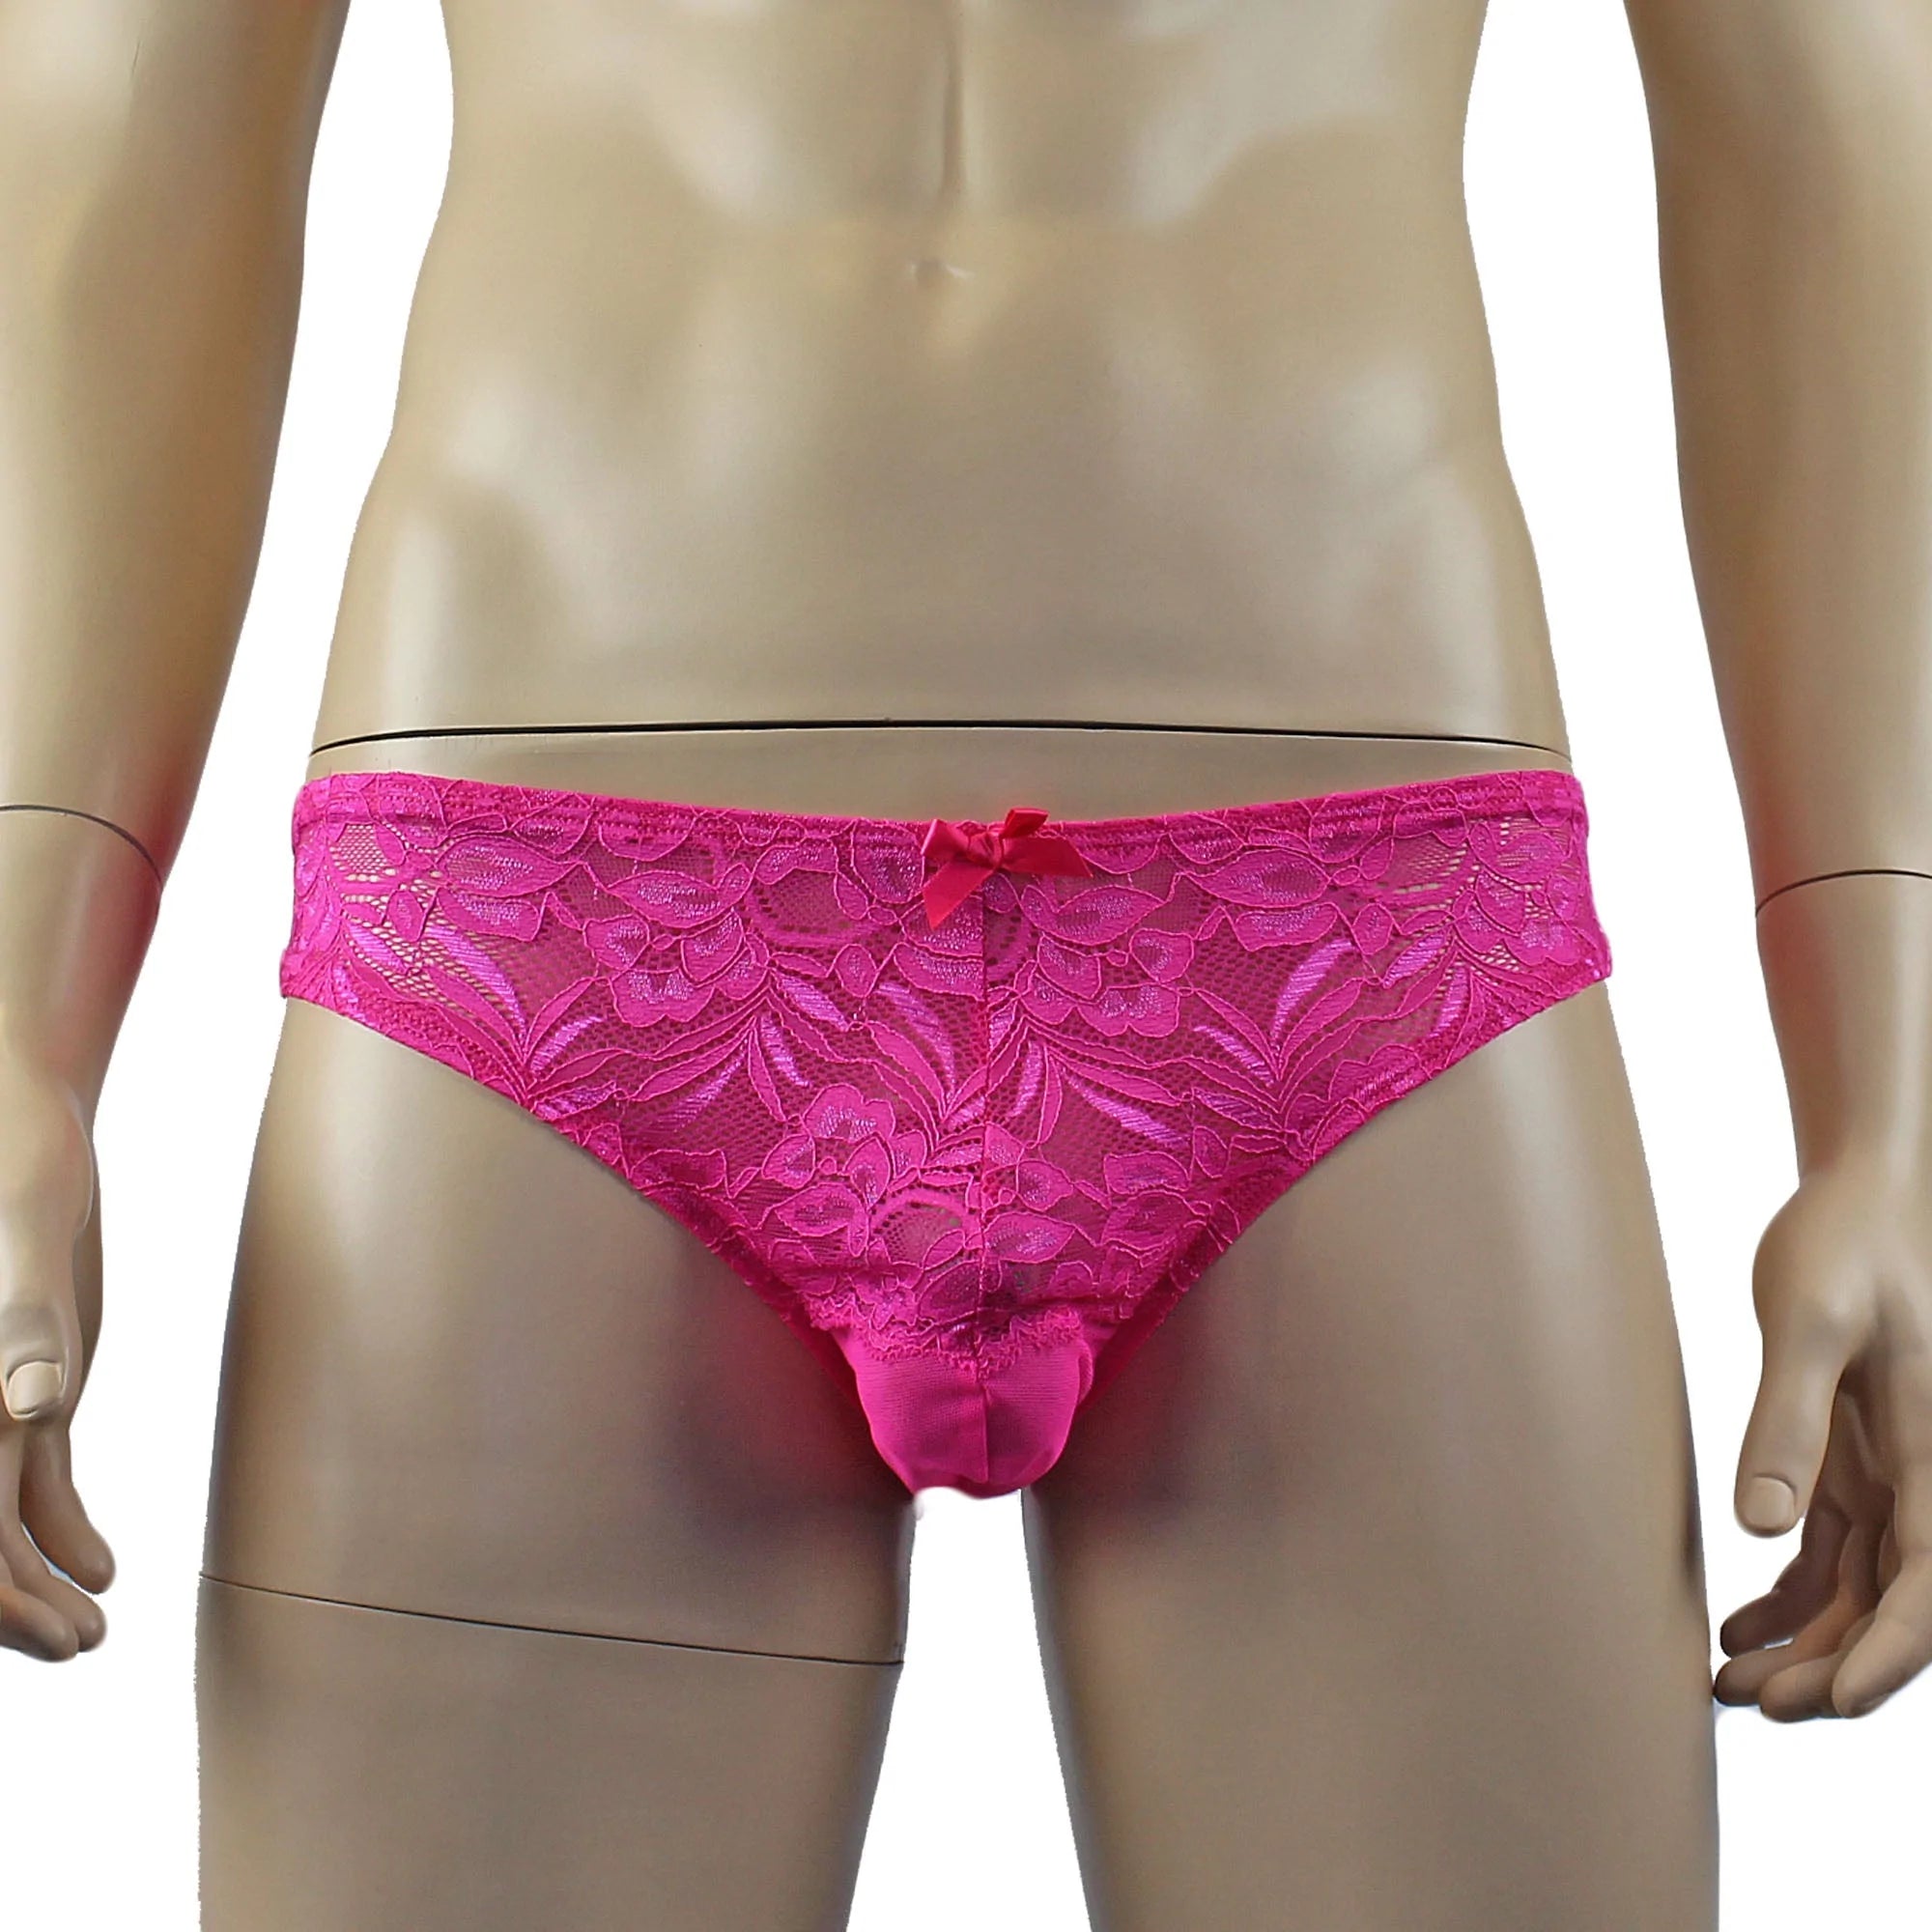 SALE - Mens Kristy Sexy Lace Bikini Brief Panties with See through Back Hot Pink